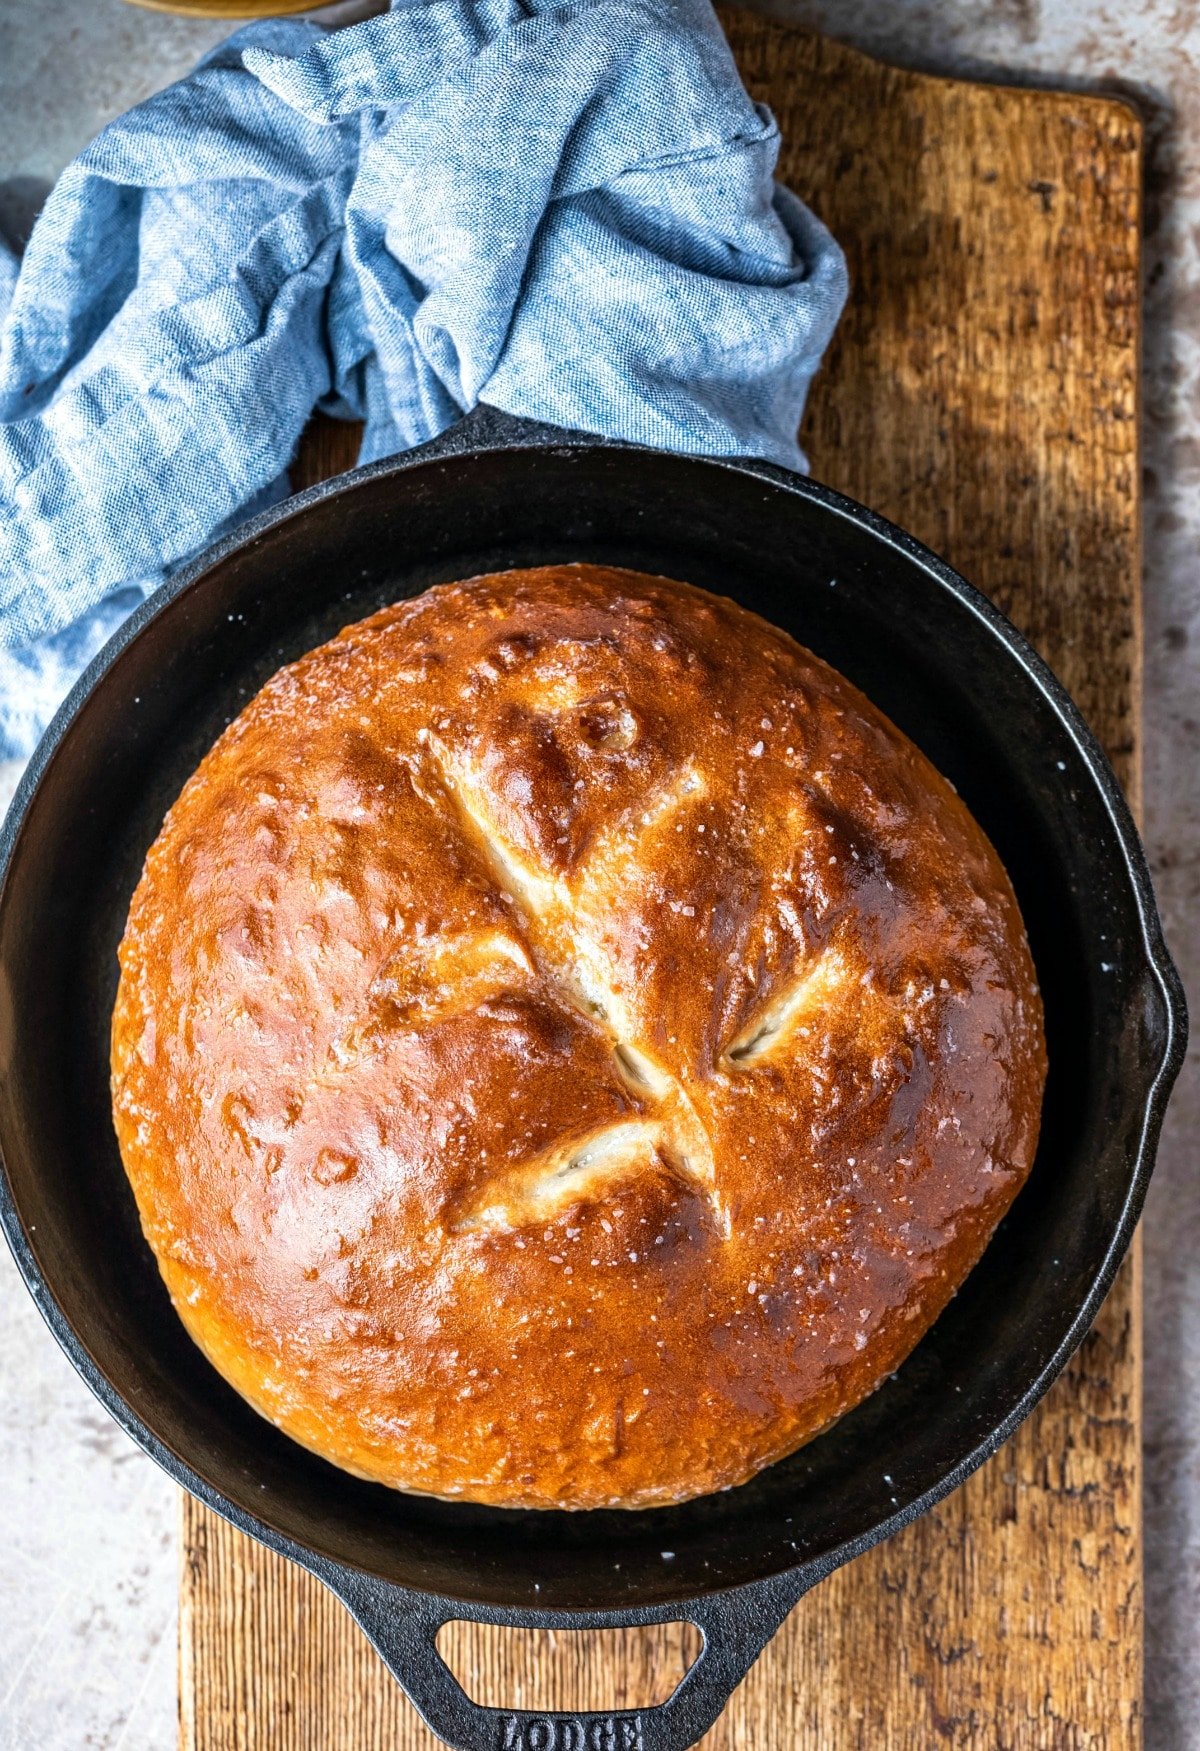 Cast iron skillet with a loaf of baked bread on a wooden cutting board